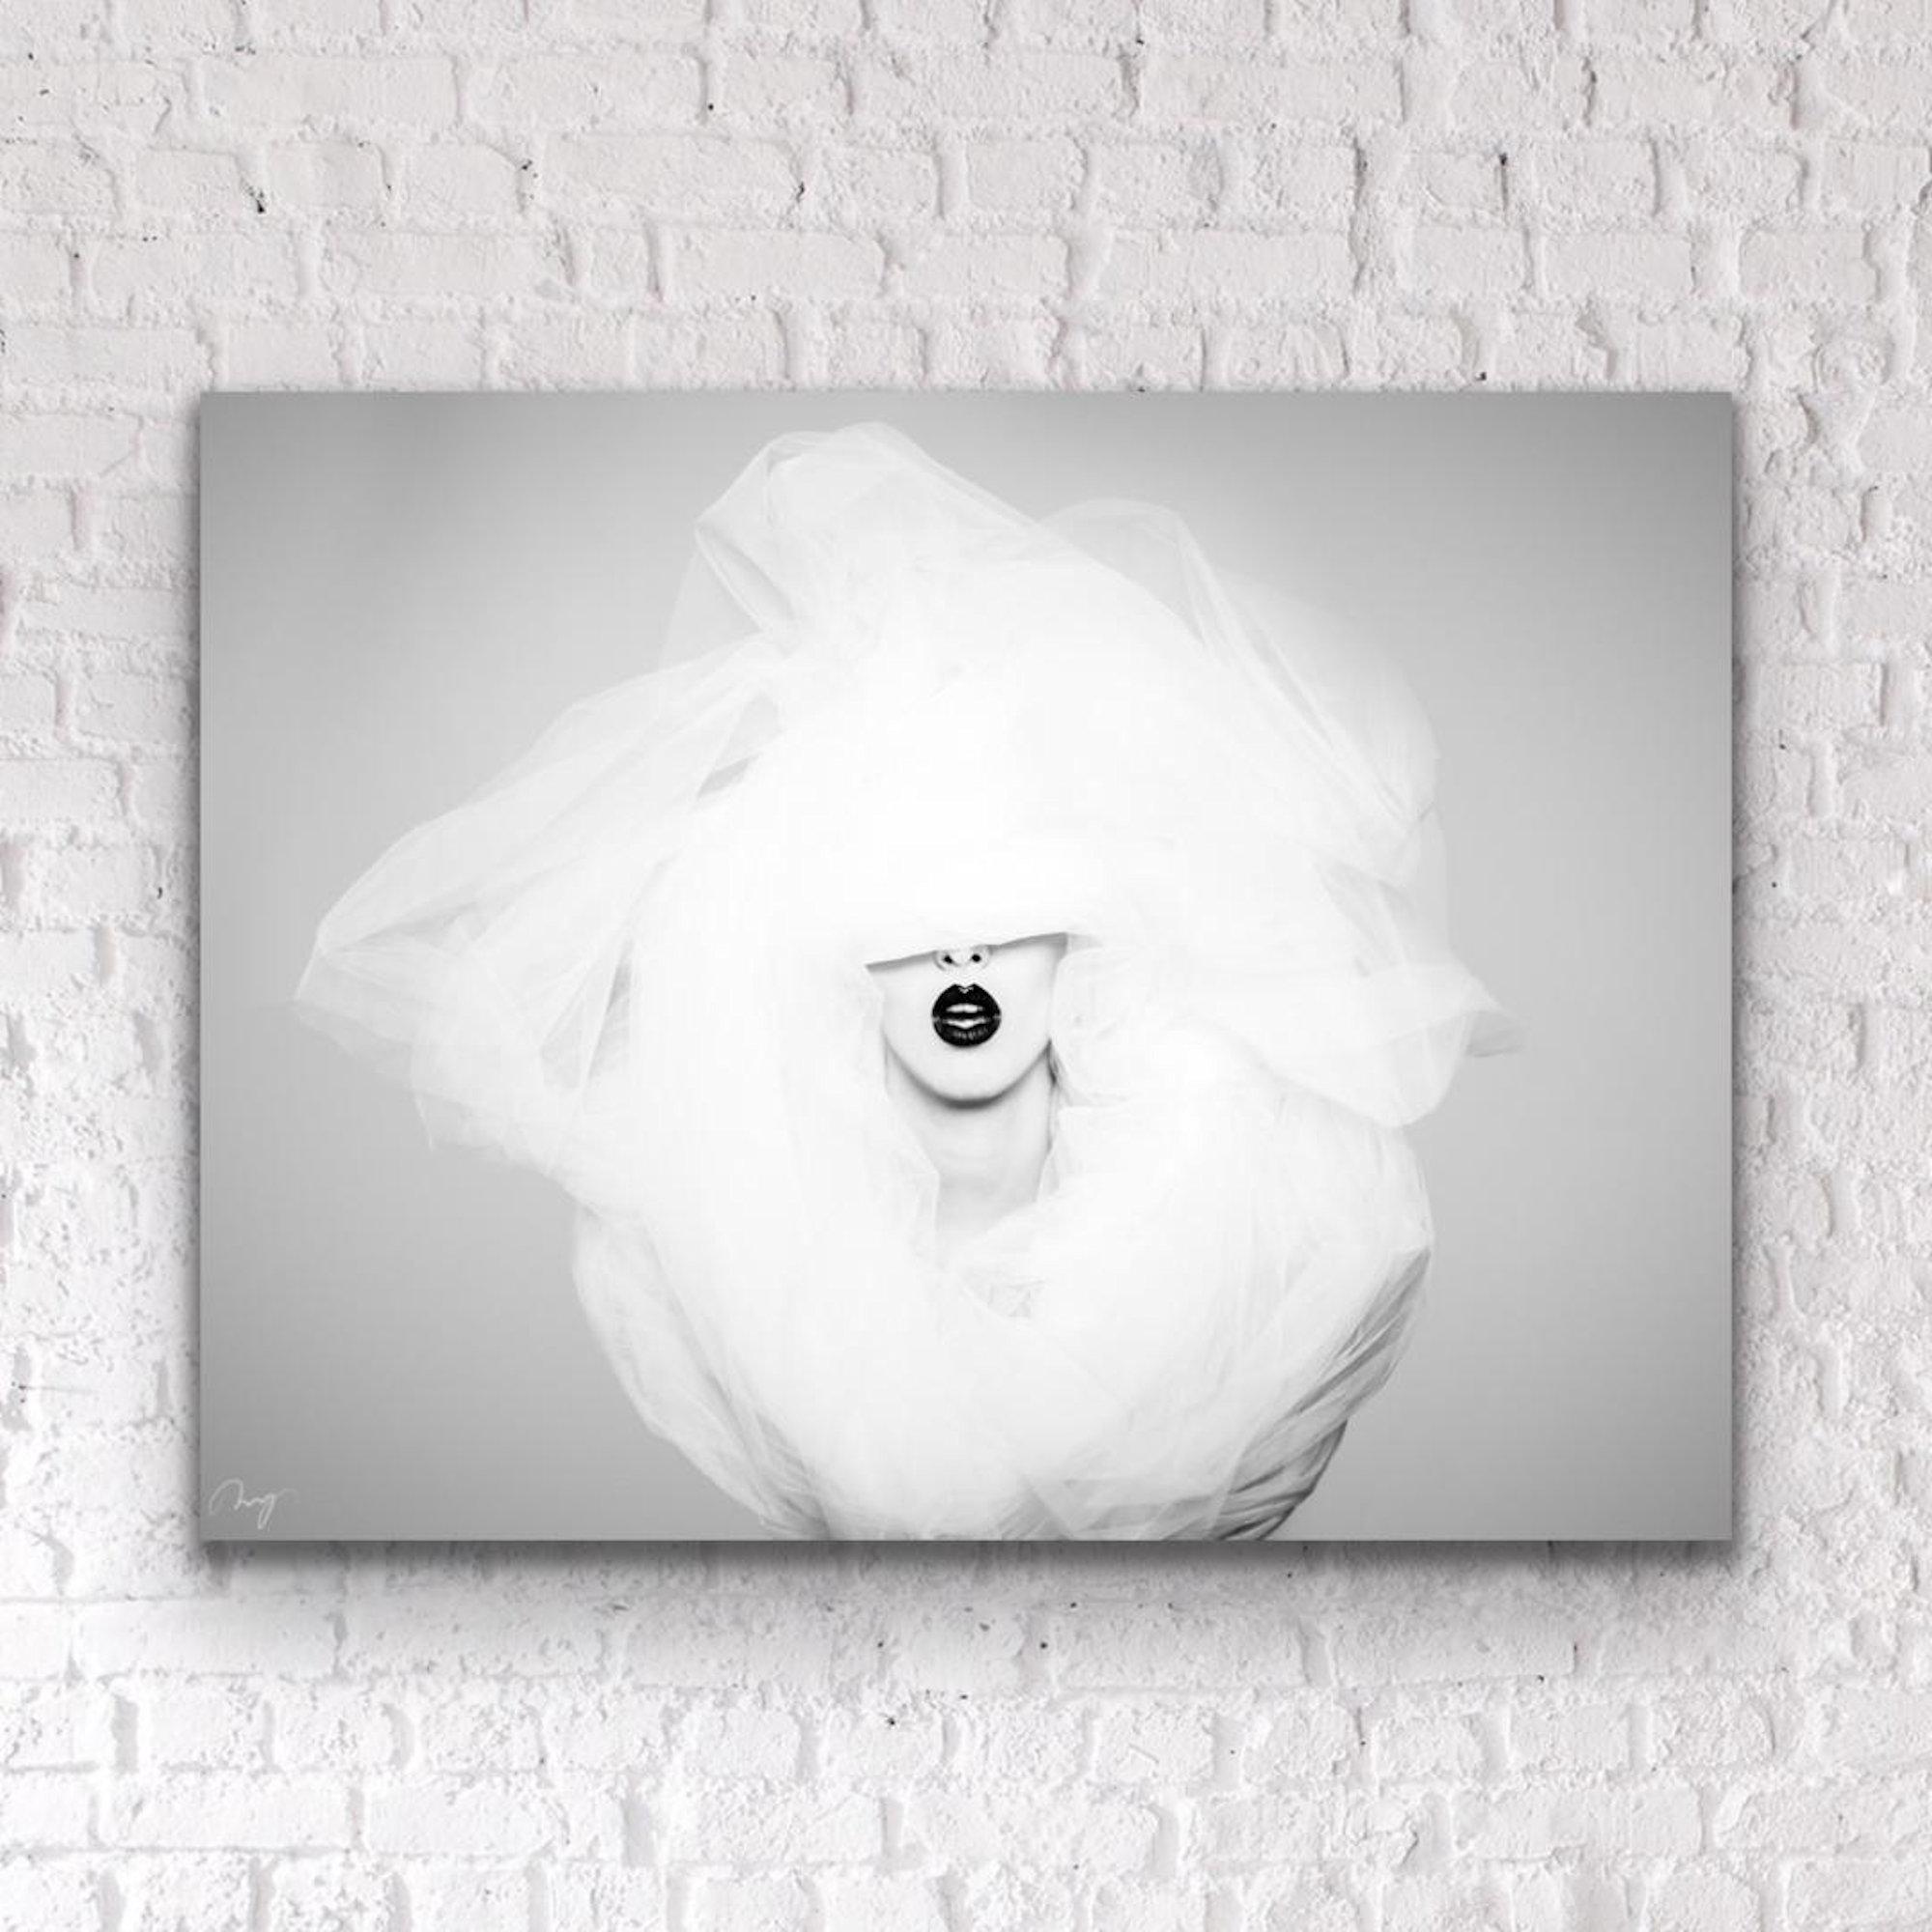 Contemporary modern abstract graphic art, giclee printed on lightweight metal composite.
Angora Veil is a heart-birthed photographic homage expressing “perfection”. Women growing up in today’s world are taught to be perfect from a young age. From